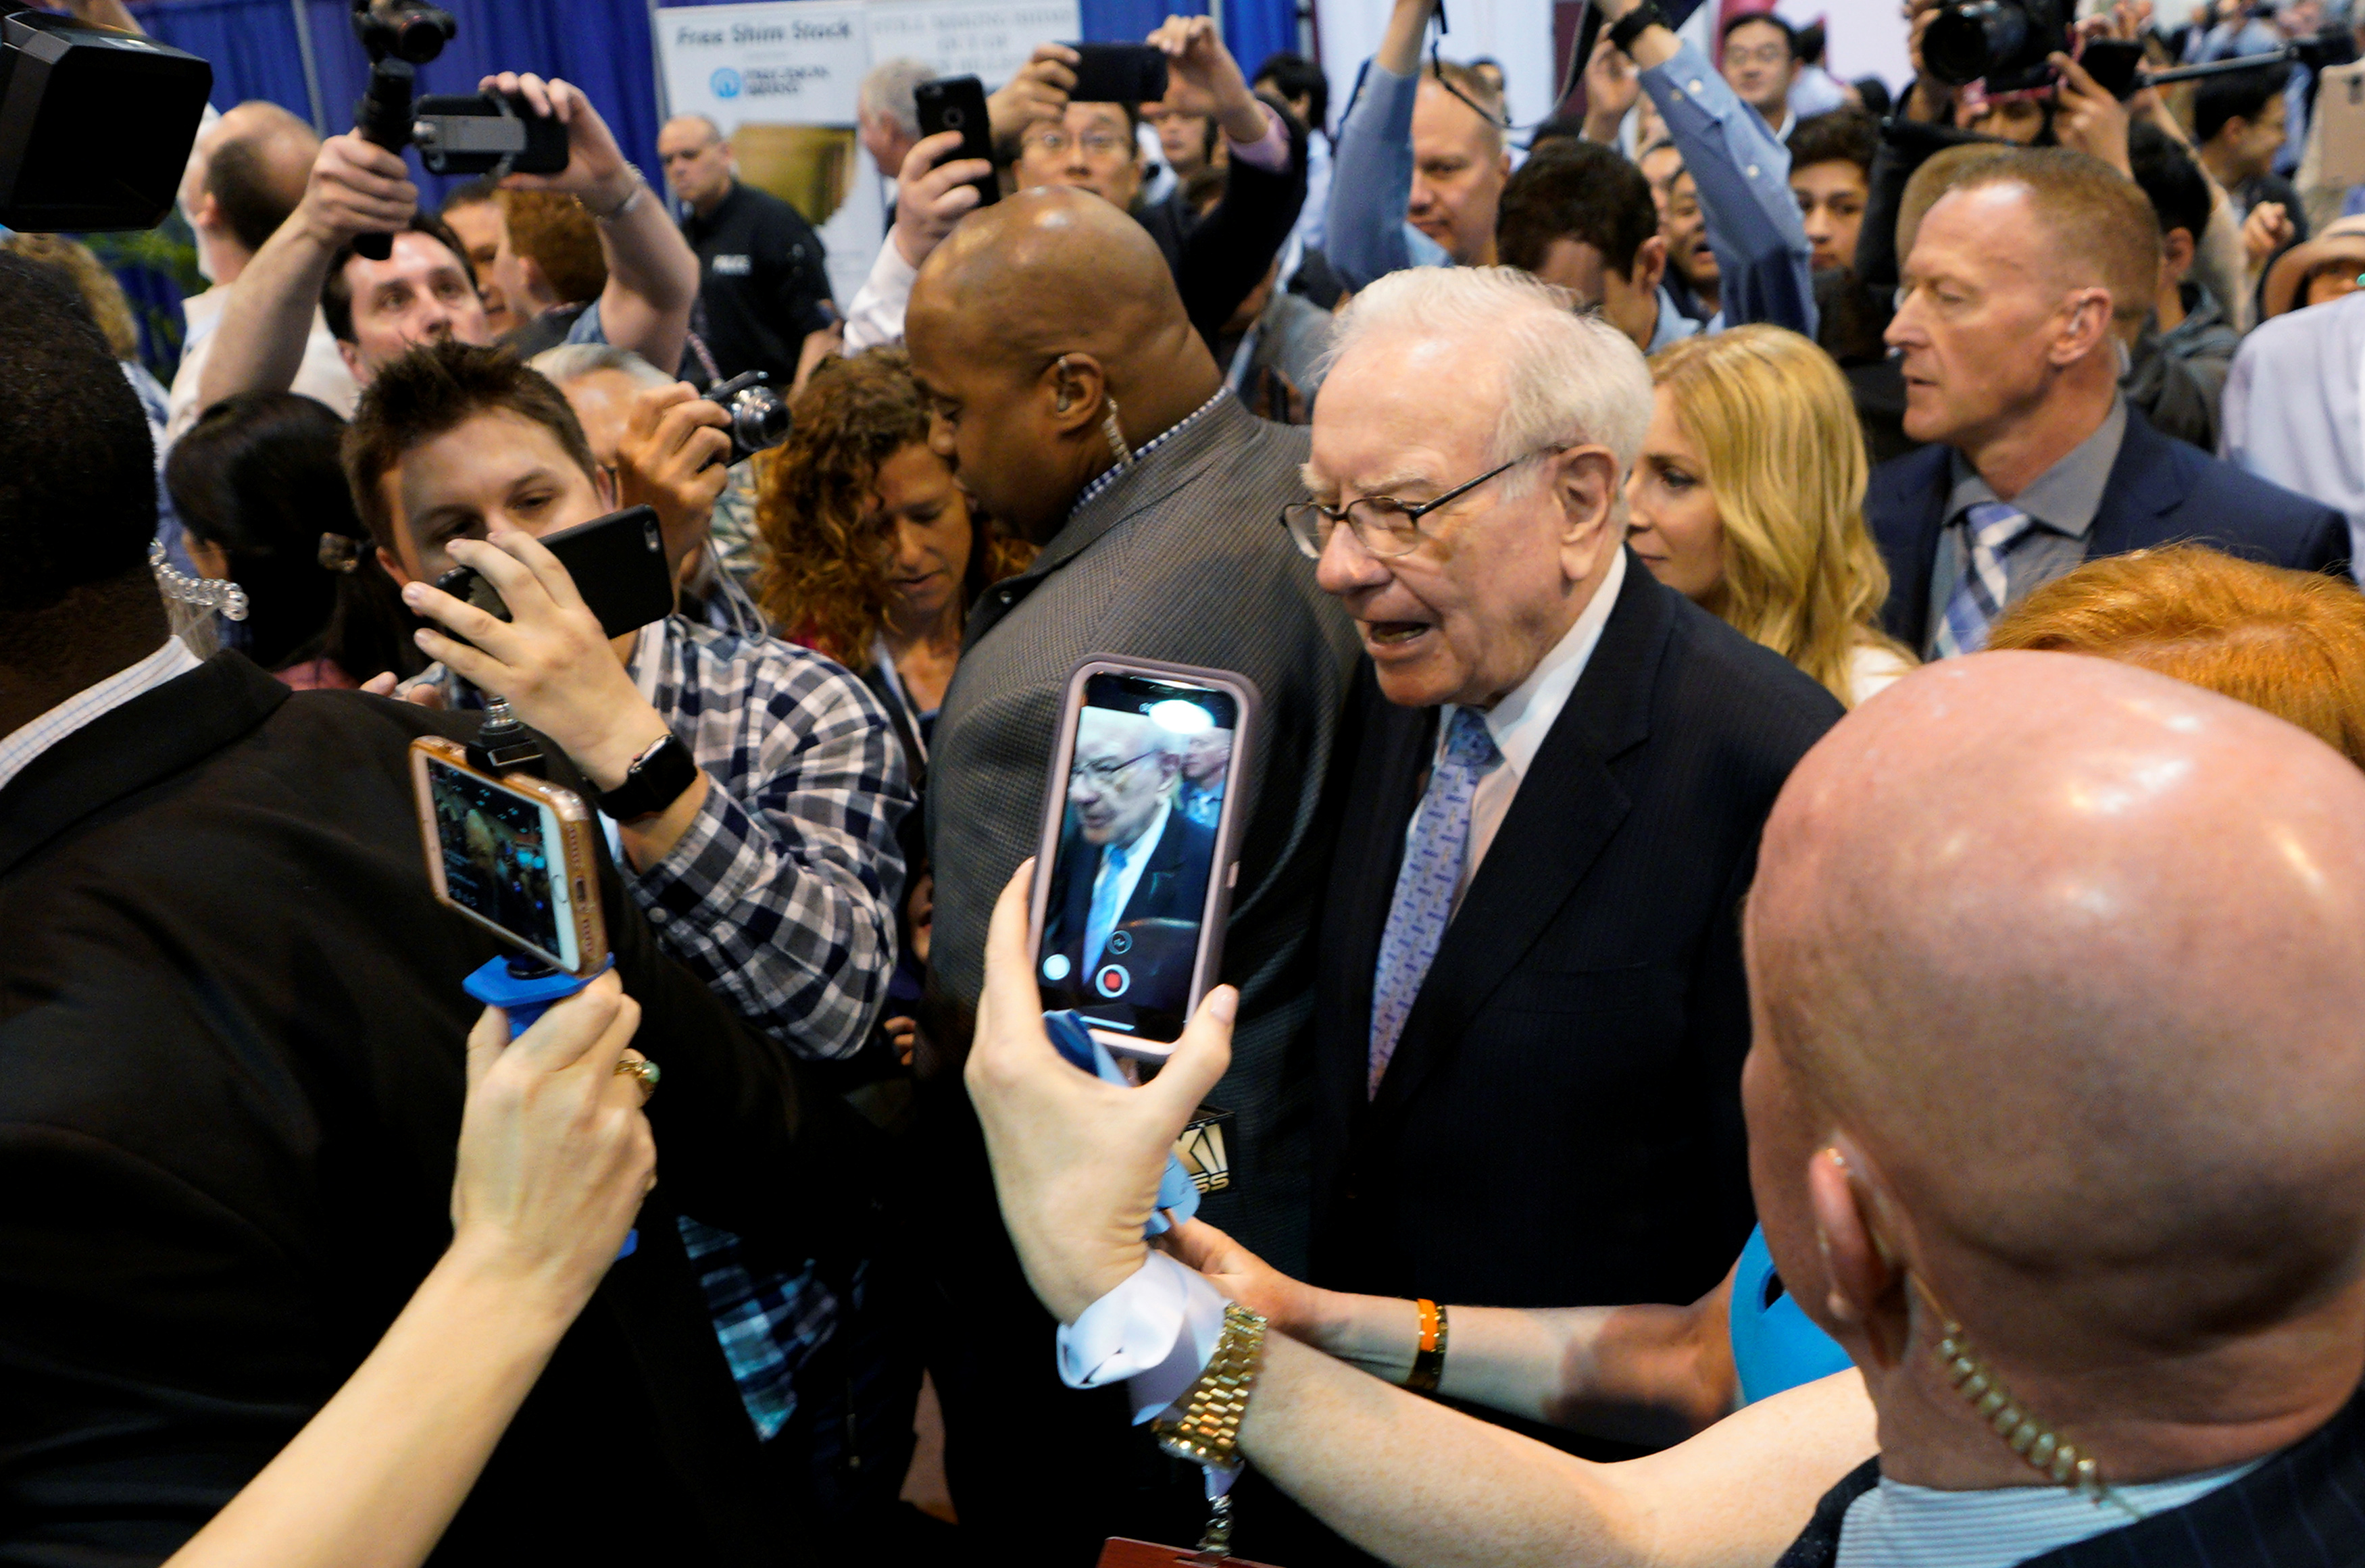 Warren Buffett, CEO of Berkshire Hathaway Inc, walks through the exhibit hall at the company's annual meeting in Omaha